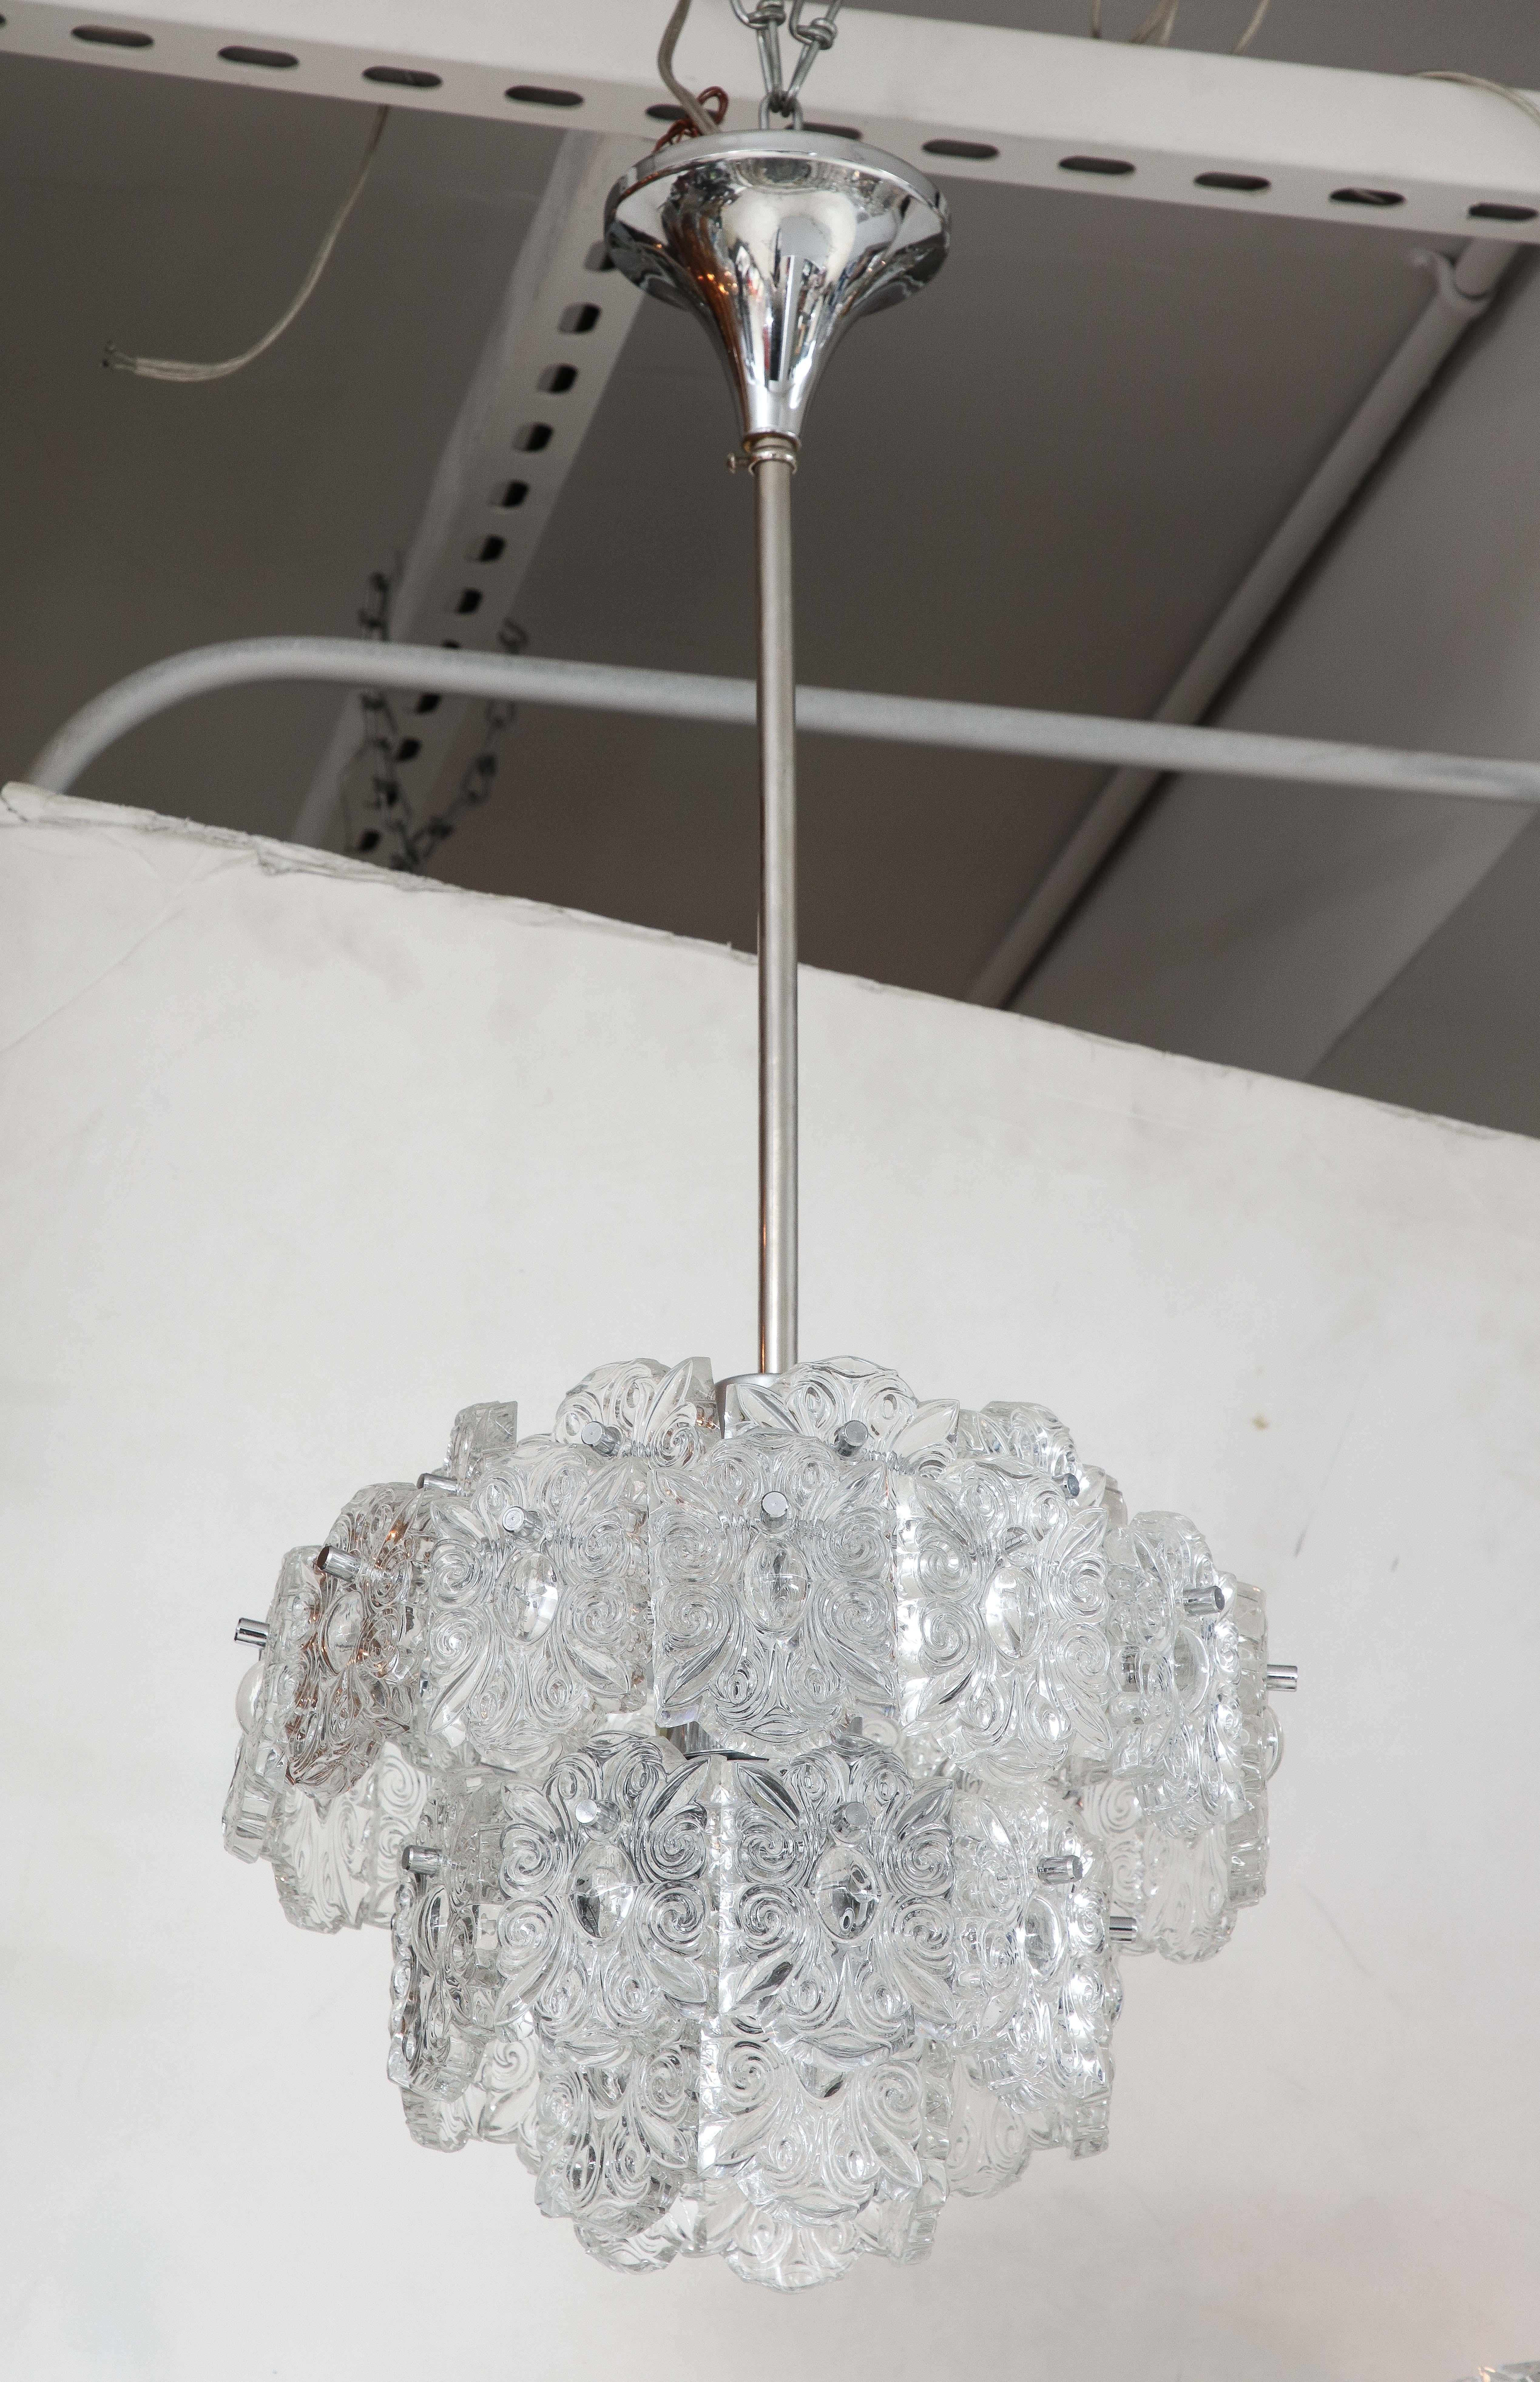 Scandinavian Modern 4 tier chandelier featuring oblong stylized cameo cystals suspended from a polished nickel frame and canopy. Rewired for use in the USA, 7 sockets.